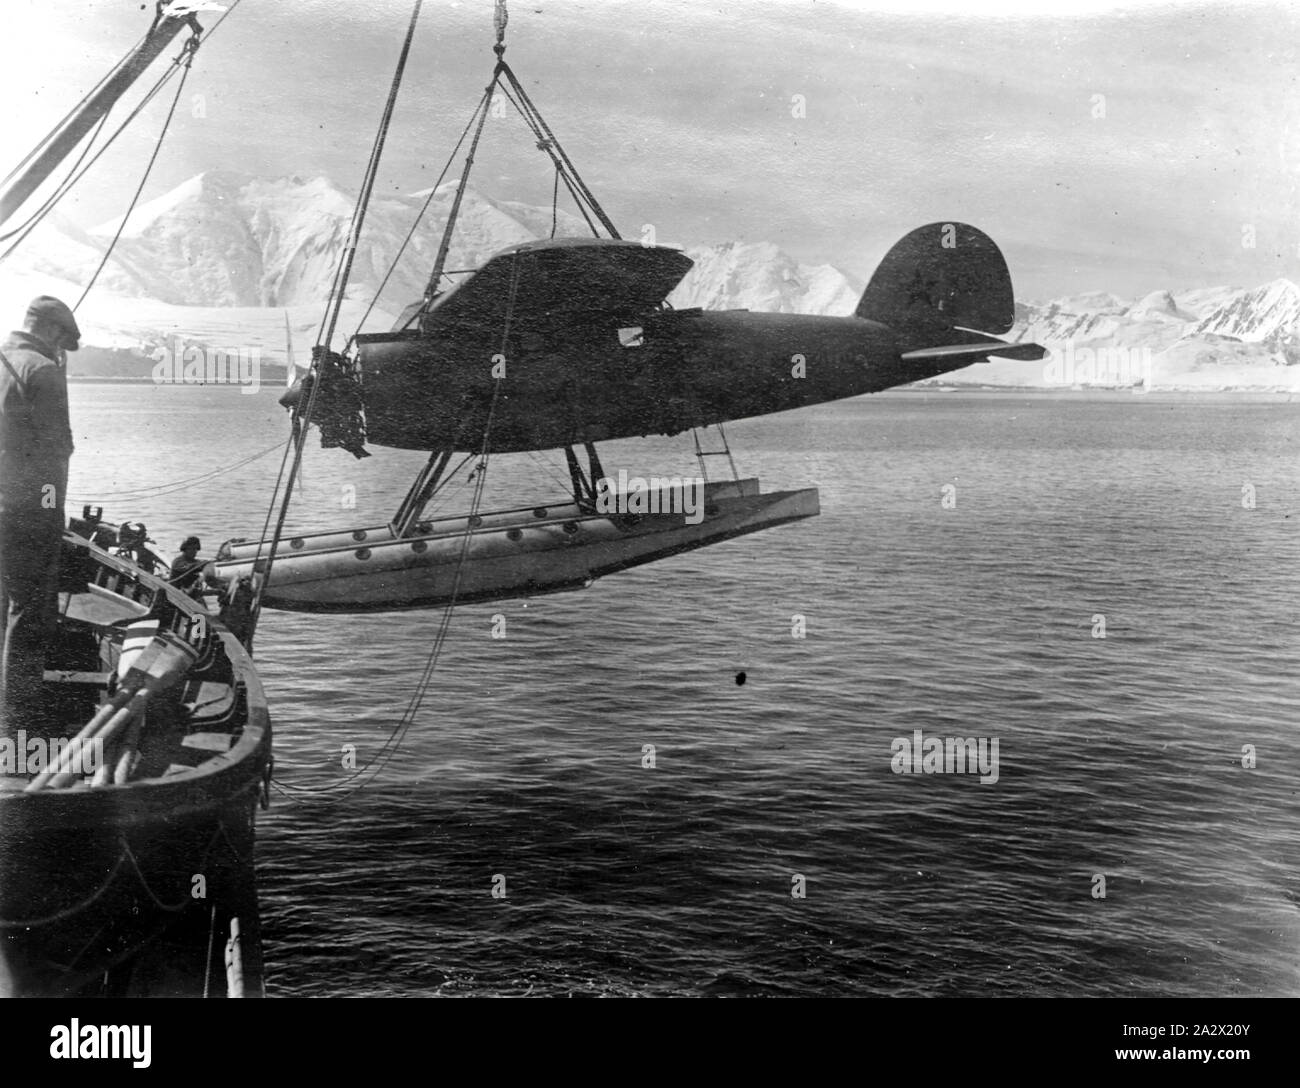 Photograph - Lowering Lockheed Vega Float Plane from Ship, Wilkins Hearst Antarctic Expedition, by George Rayner, Port Lockroy, Antarctica, circa 1929, PHOTOGRAPH; UNLOADING AEROPLANE FITTED WITH FLOATS FROM SHIP, CIRCA 1929. AEROPLANE MARKED WILKINS HEARST ANTARCTIC EXPEDITION AND LOCKHEED AIRCRAFT CO. LOS ANGELES U.S.A. AND VEGA X3903. PHOTOGRAPH PROBABLY TAKEN BY GEORGE RAYNER IN ANTARCTICA Stock Photo